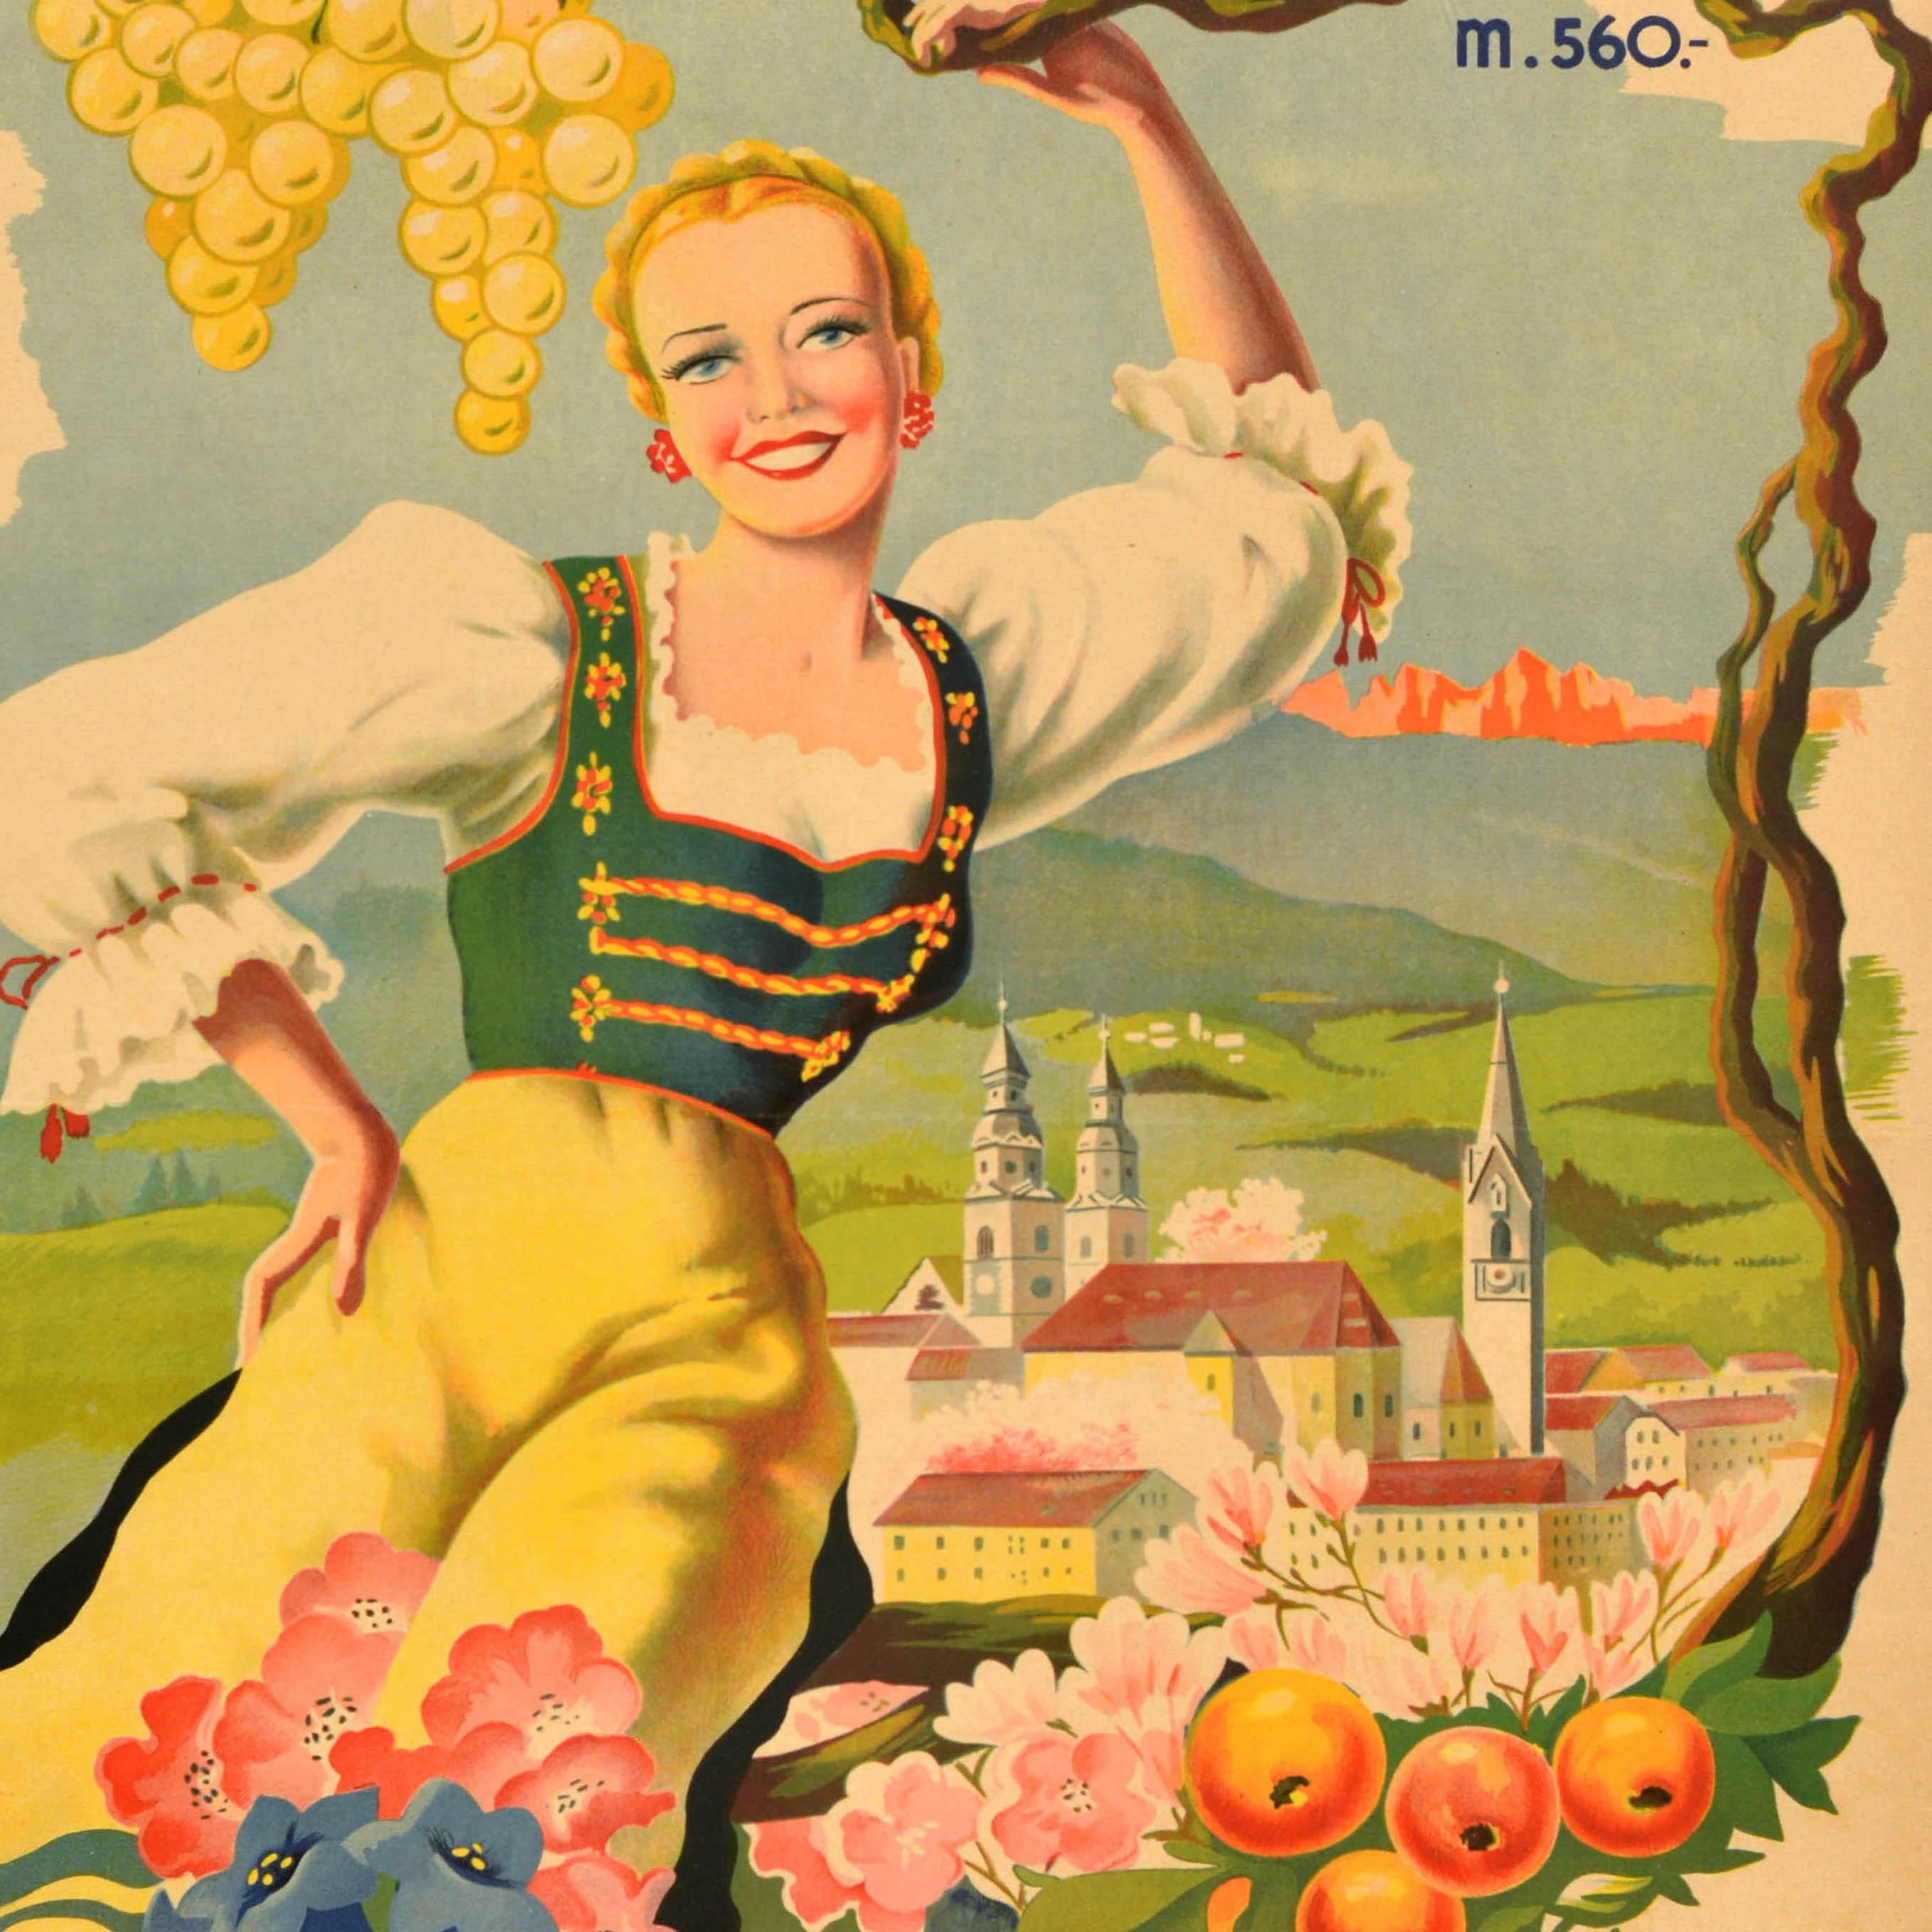 Original vintage travel advertising poster for Bressanone m.560 Dolomiti Italy / Brixen in the Dolomites featuring a colourful design by Filippo Romoli (1901-1969) depicting a smiling lady in traditional clothing holding a grapevine with grapes